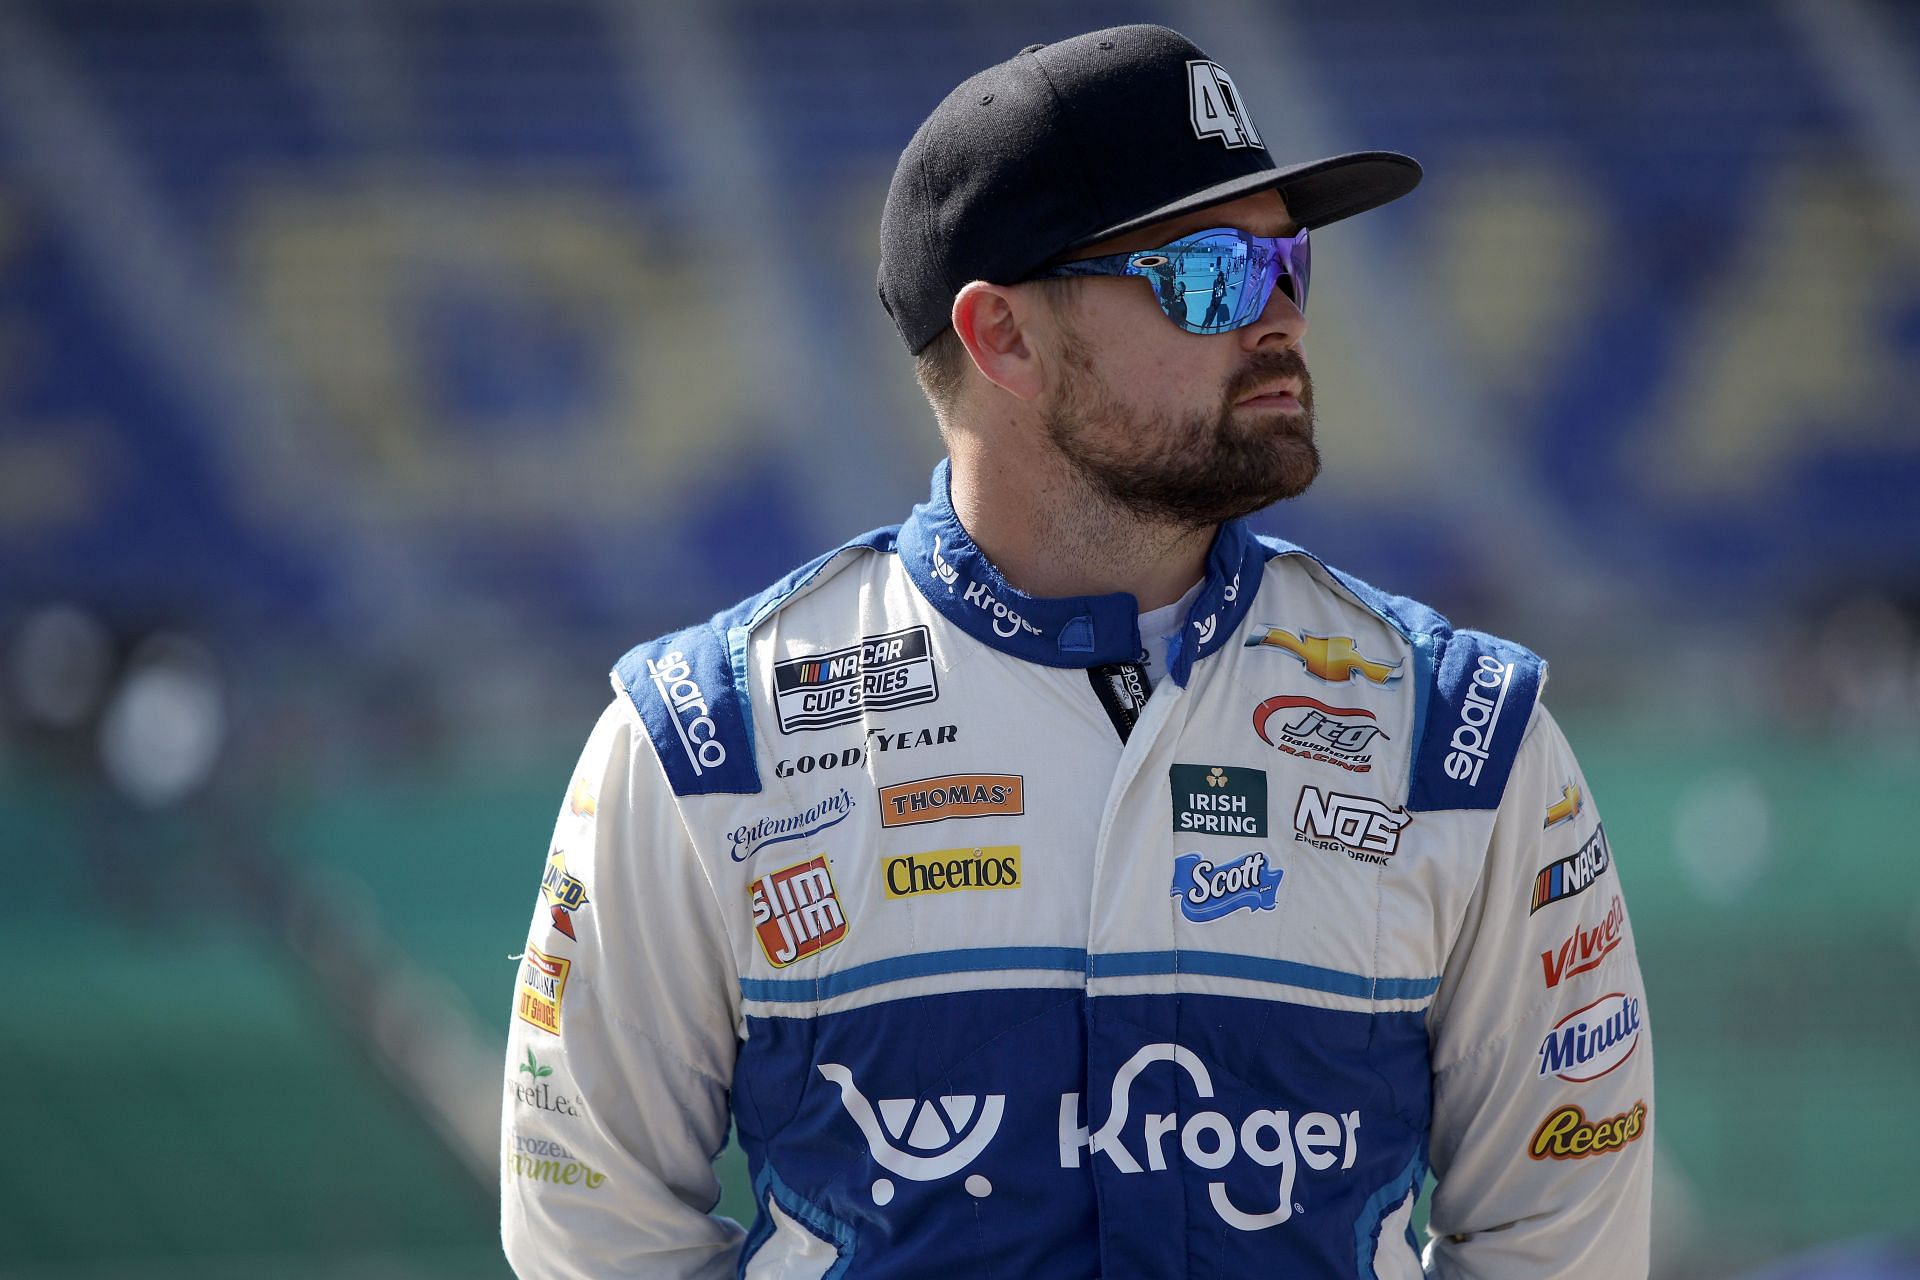 Ricky Stenhouse Jr. looks on during practice for the NASCAR Cup Series AdventHealth 400 at Kansas Speedway